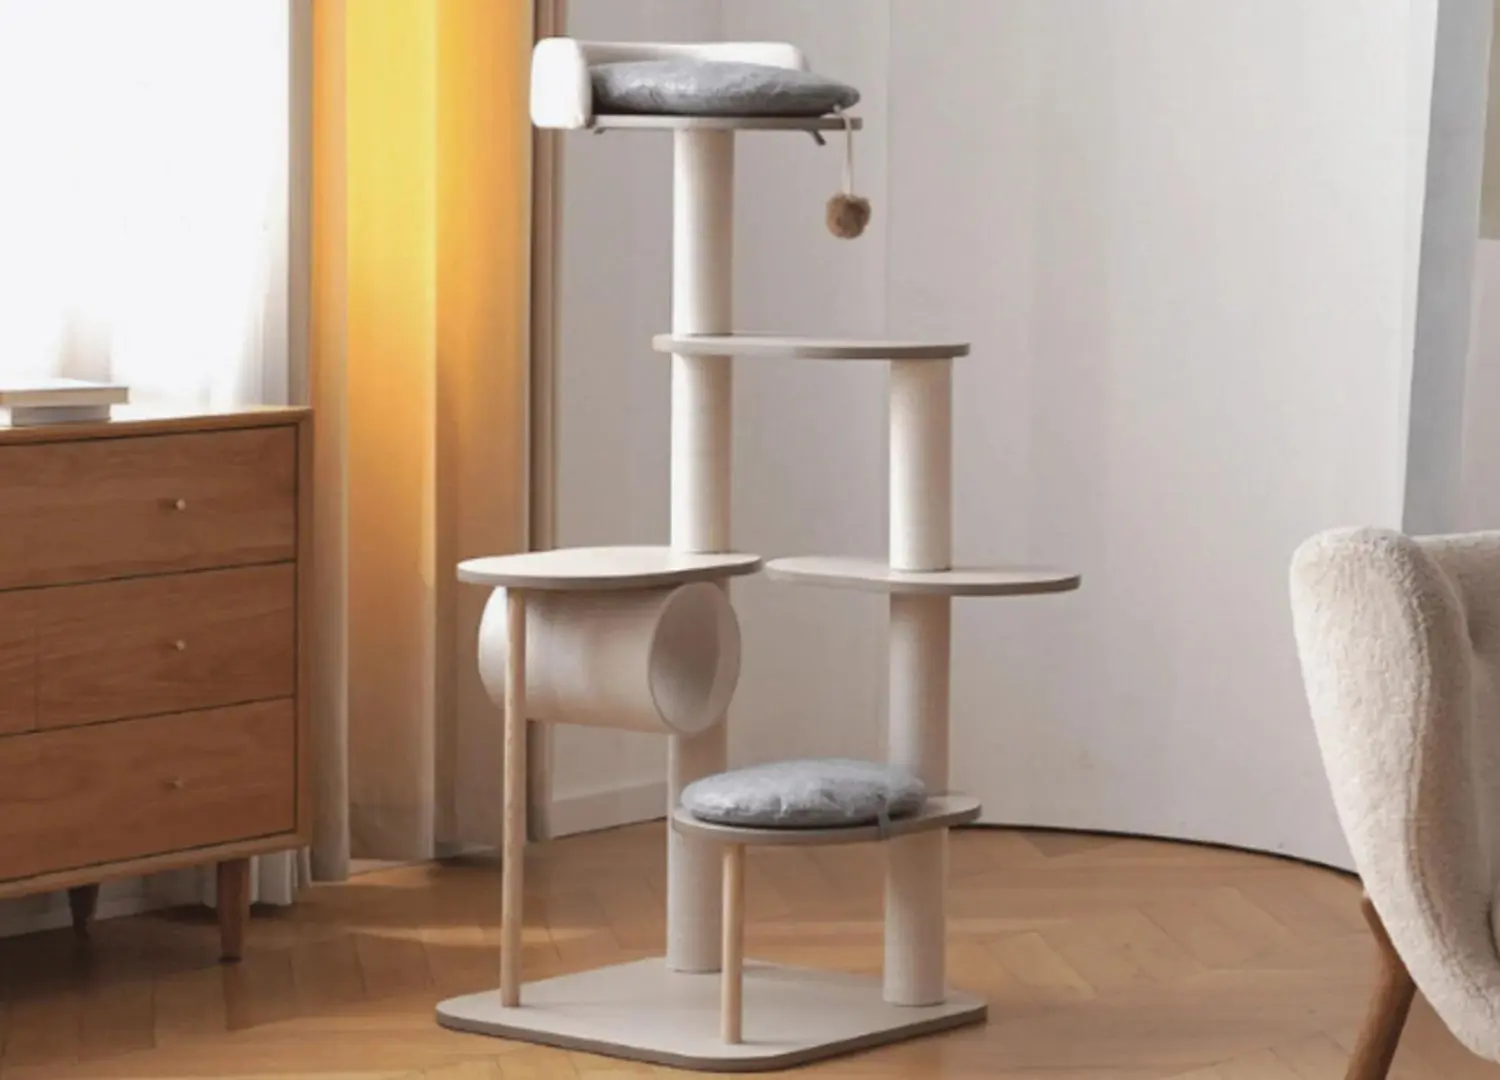 Petlibro Infinity DIY Cat Tree employs a modular and expandable system enabling infinite configurations